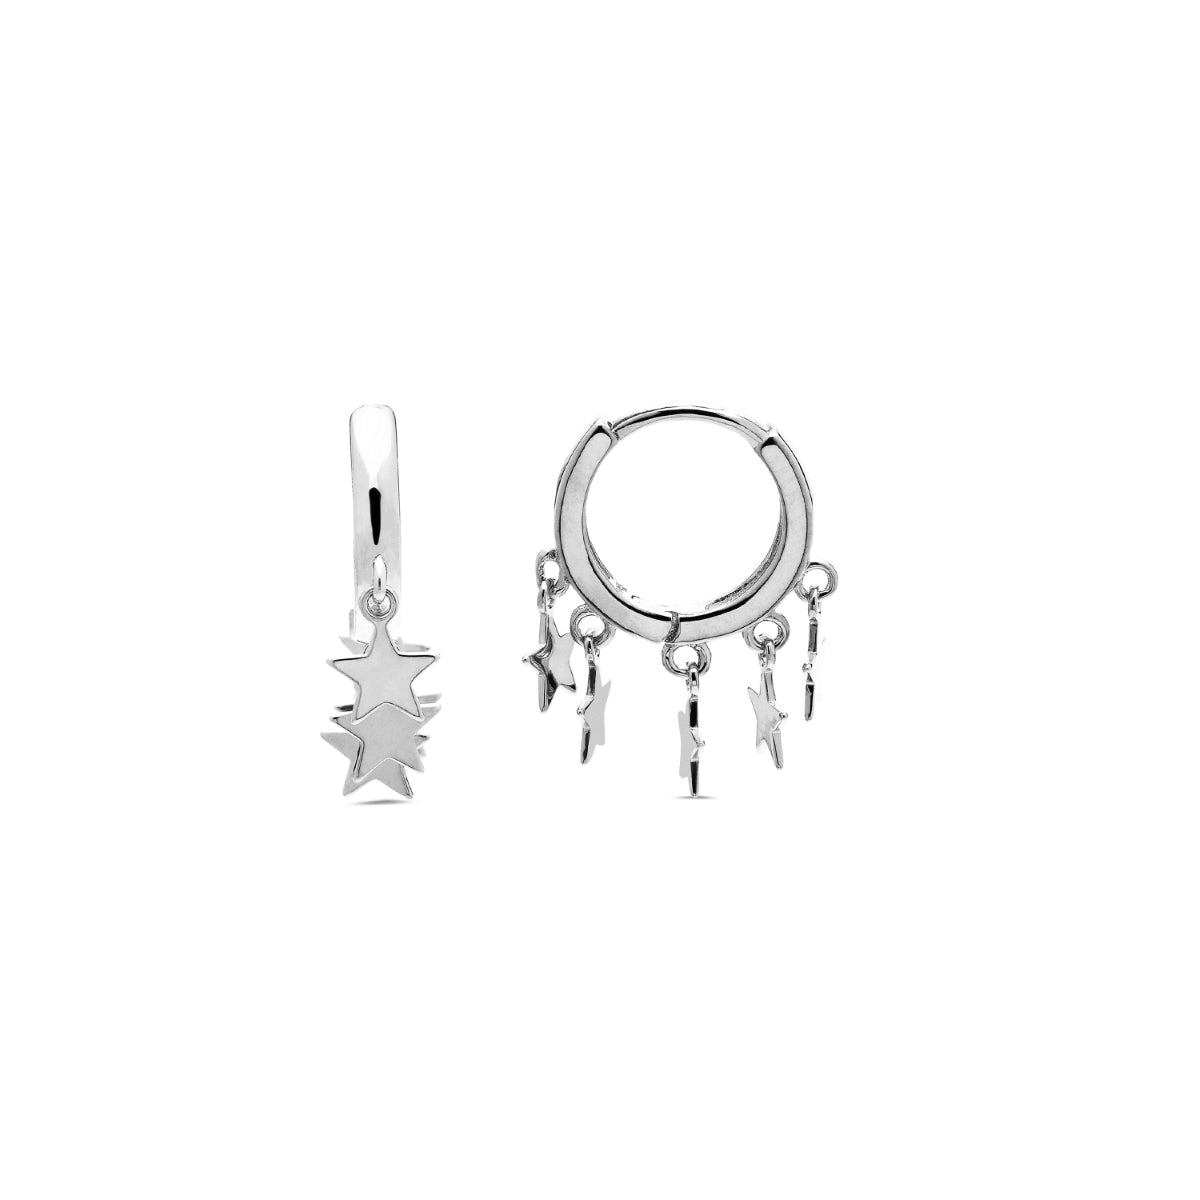 Ruthcia 925 Sterling Silver Earrings